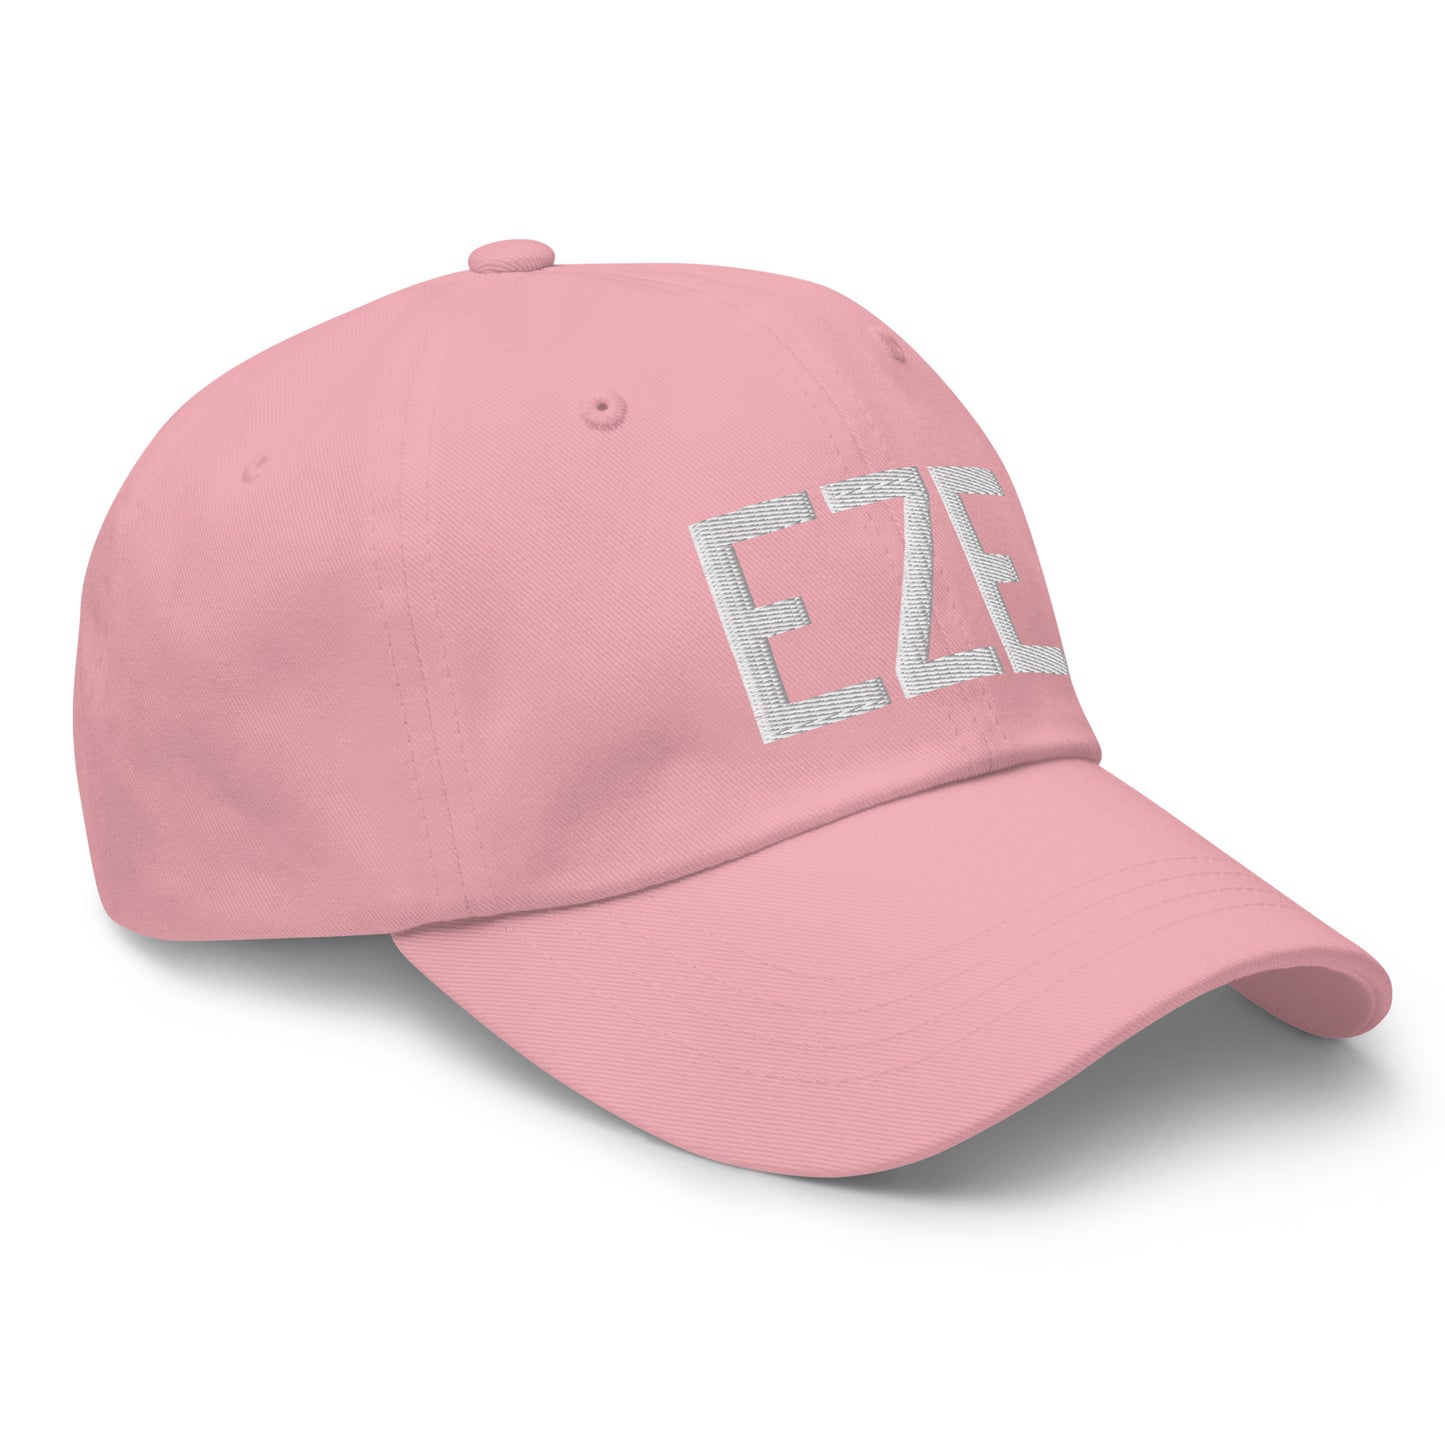 Airport Code Baseball Cap - White • EZE Buenos Aires • YHM Designs - Image 26